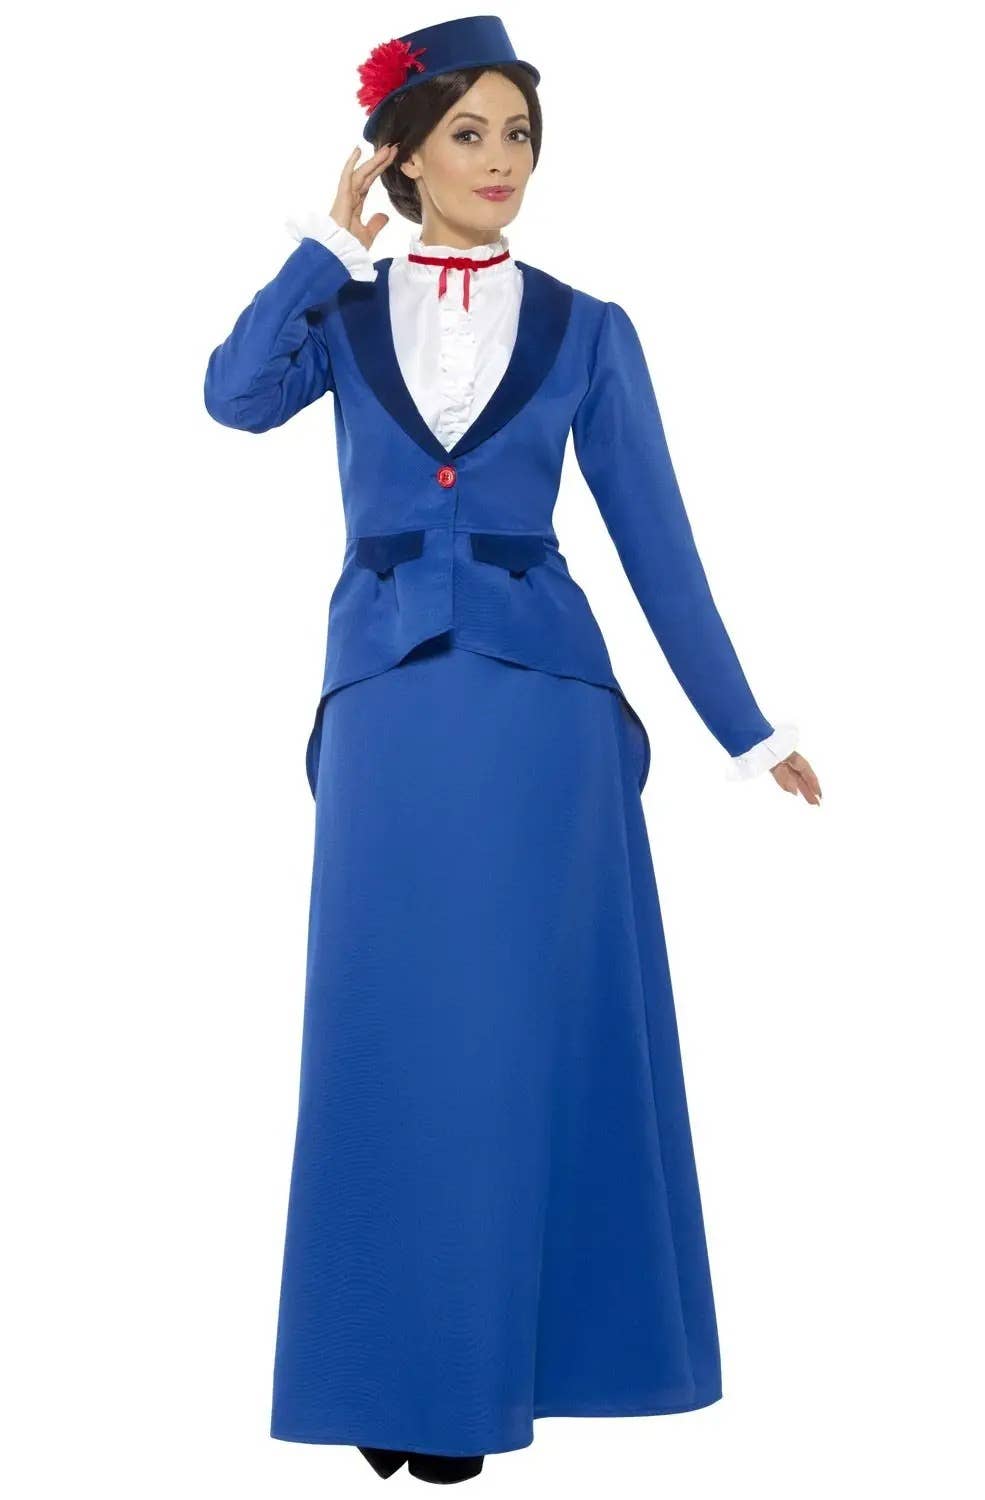 Image of Victorian Nanny Women's Plus Size Mary Poppins Costume - Front View